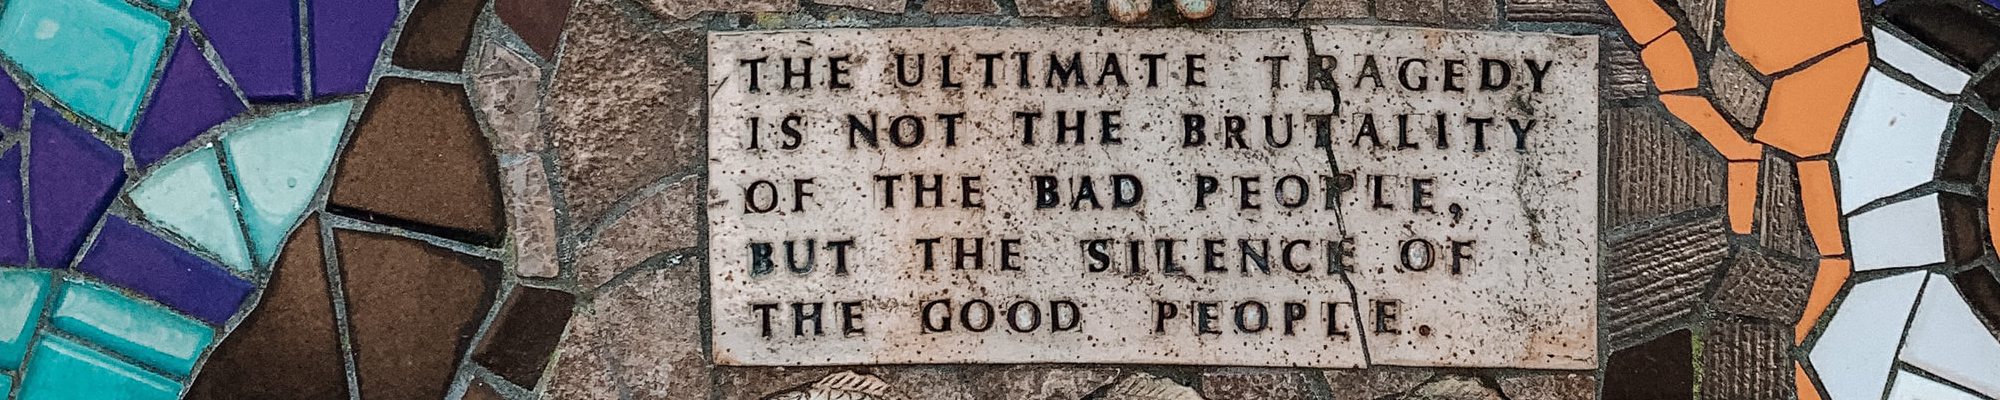 The ultimate tradegy is not the brutality of the bad people, but the silence of the good people.